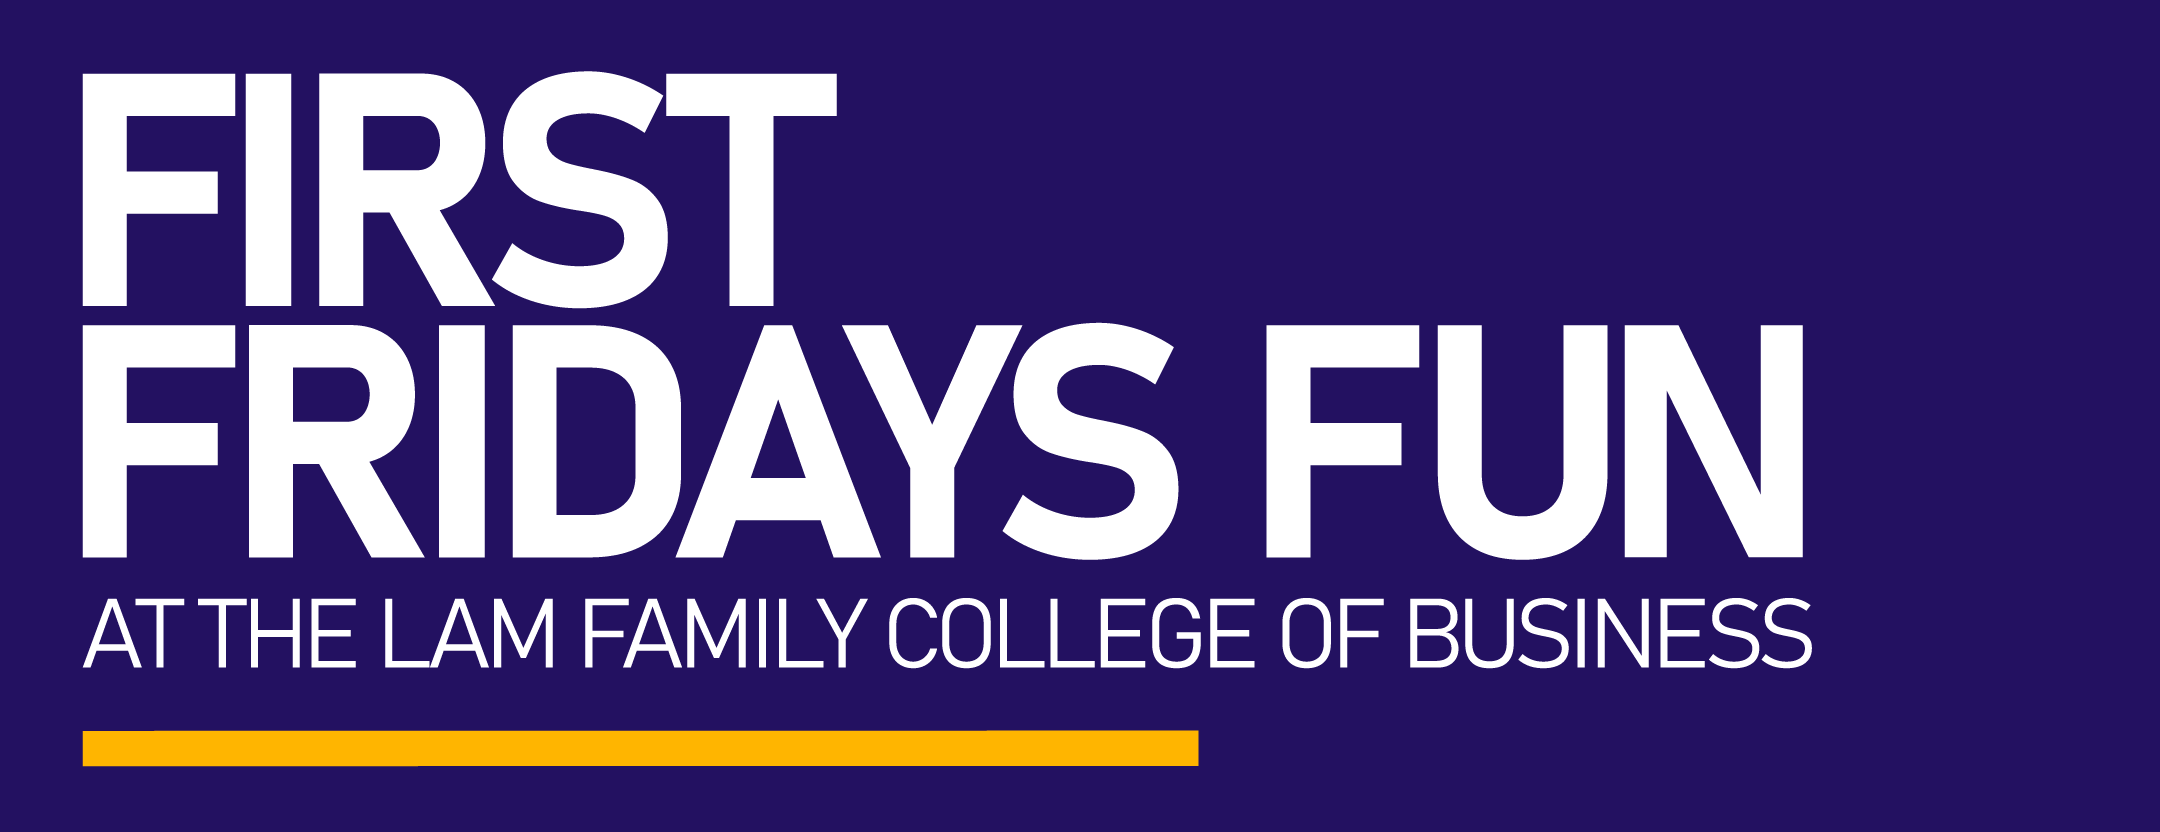 First Friday Fun at the Lam Family College of Business